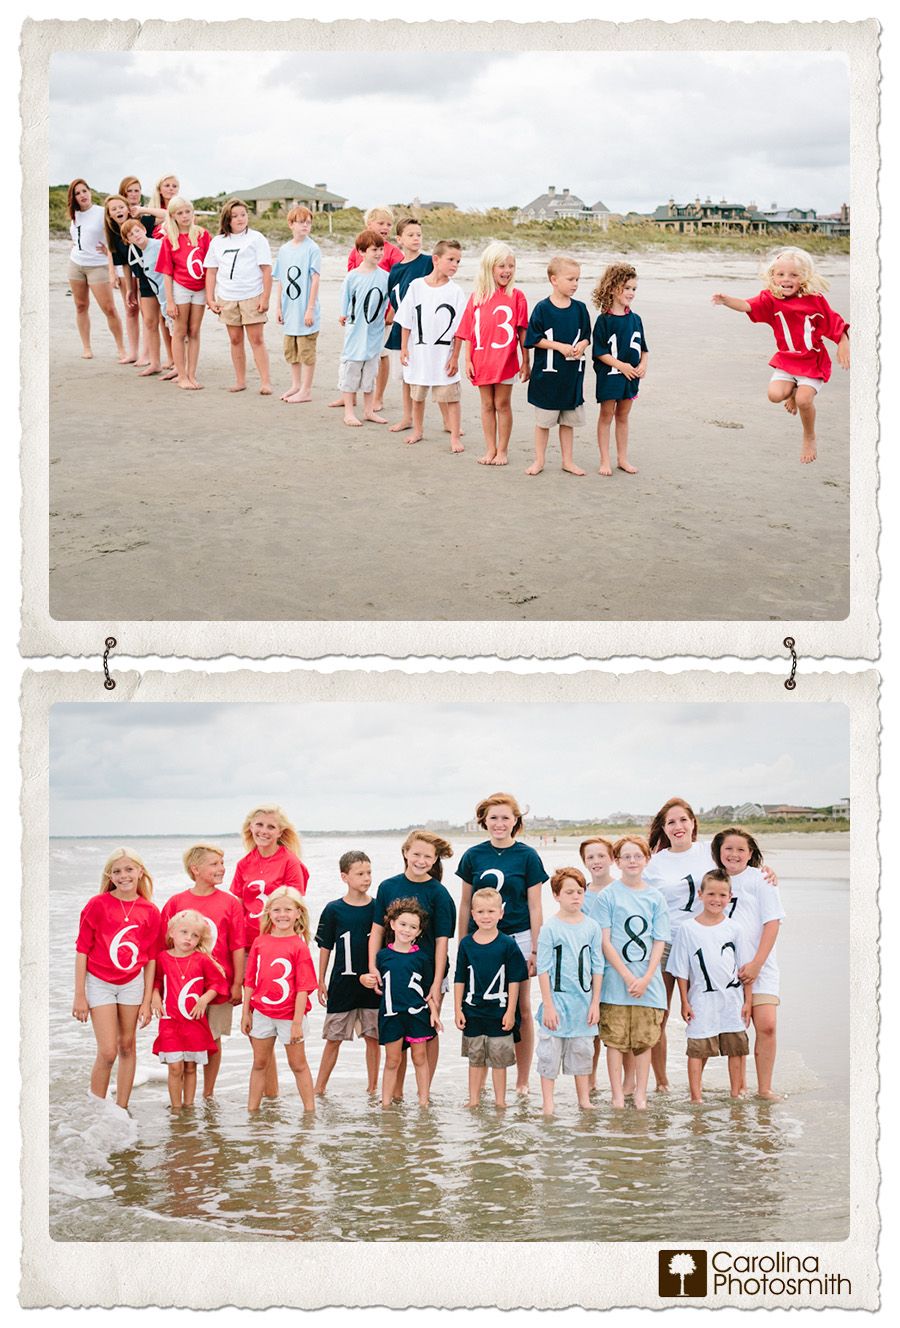 Cousin photo – number of order – color by family. So great!